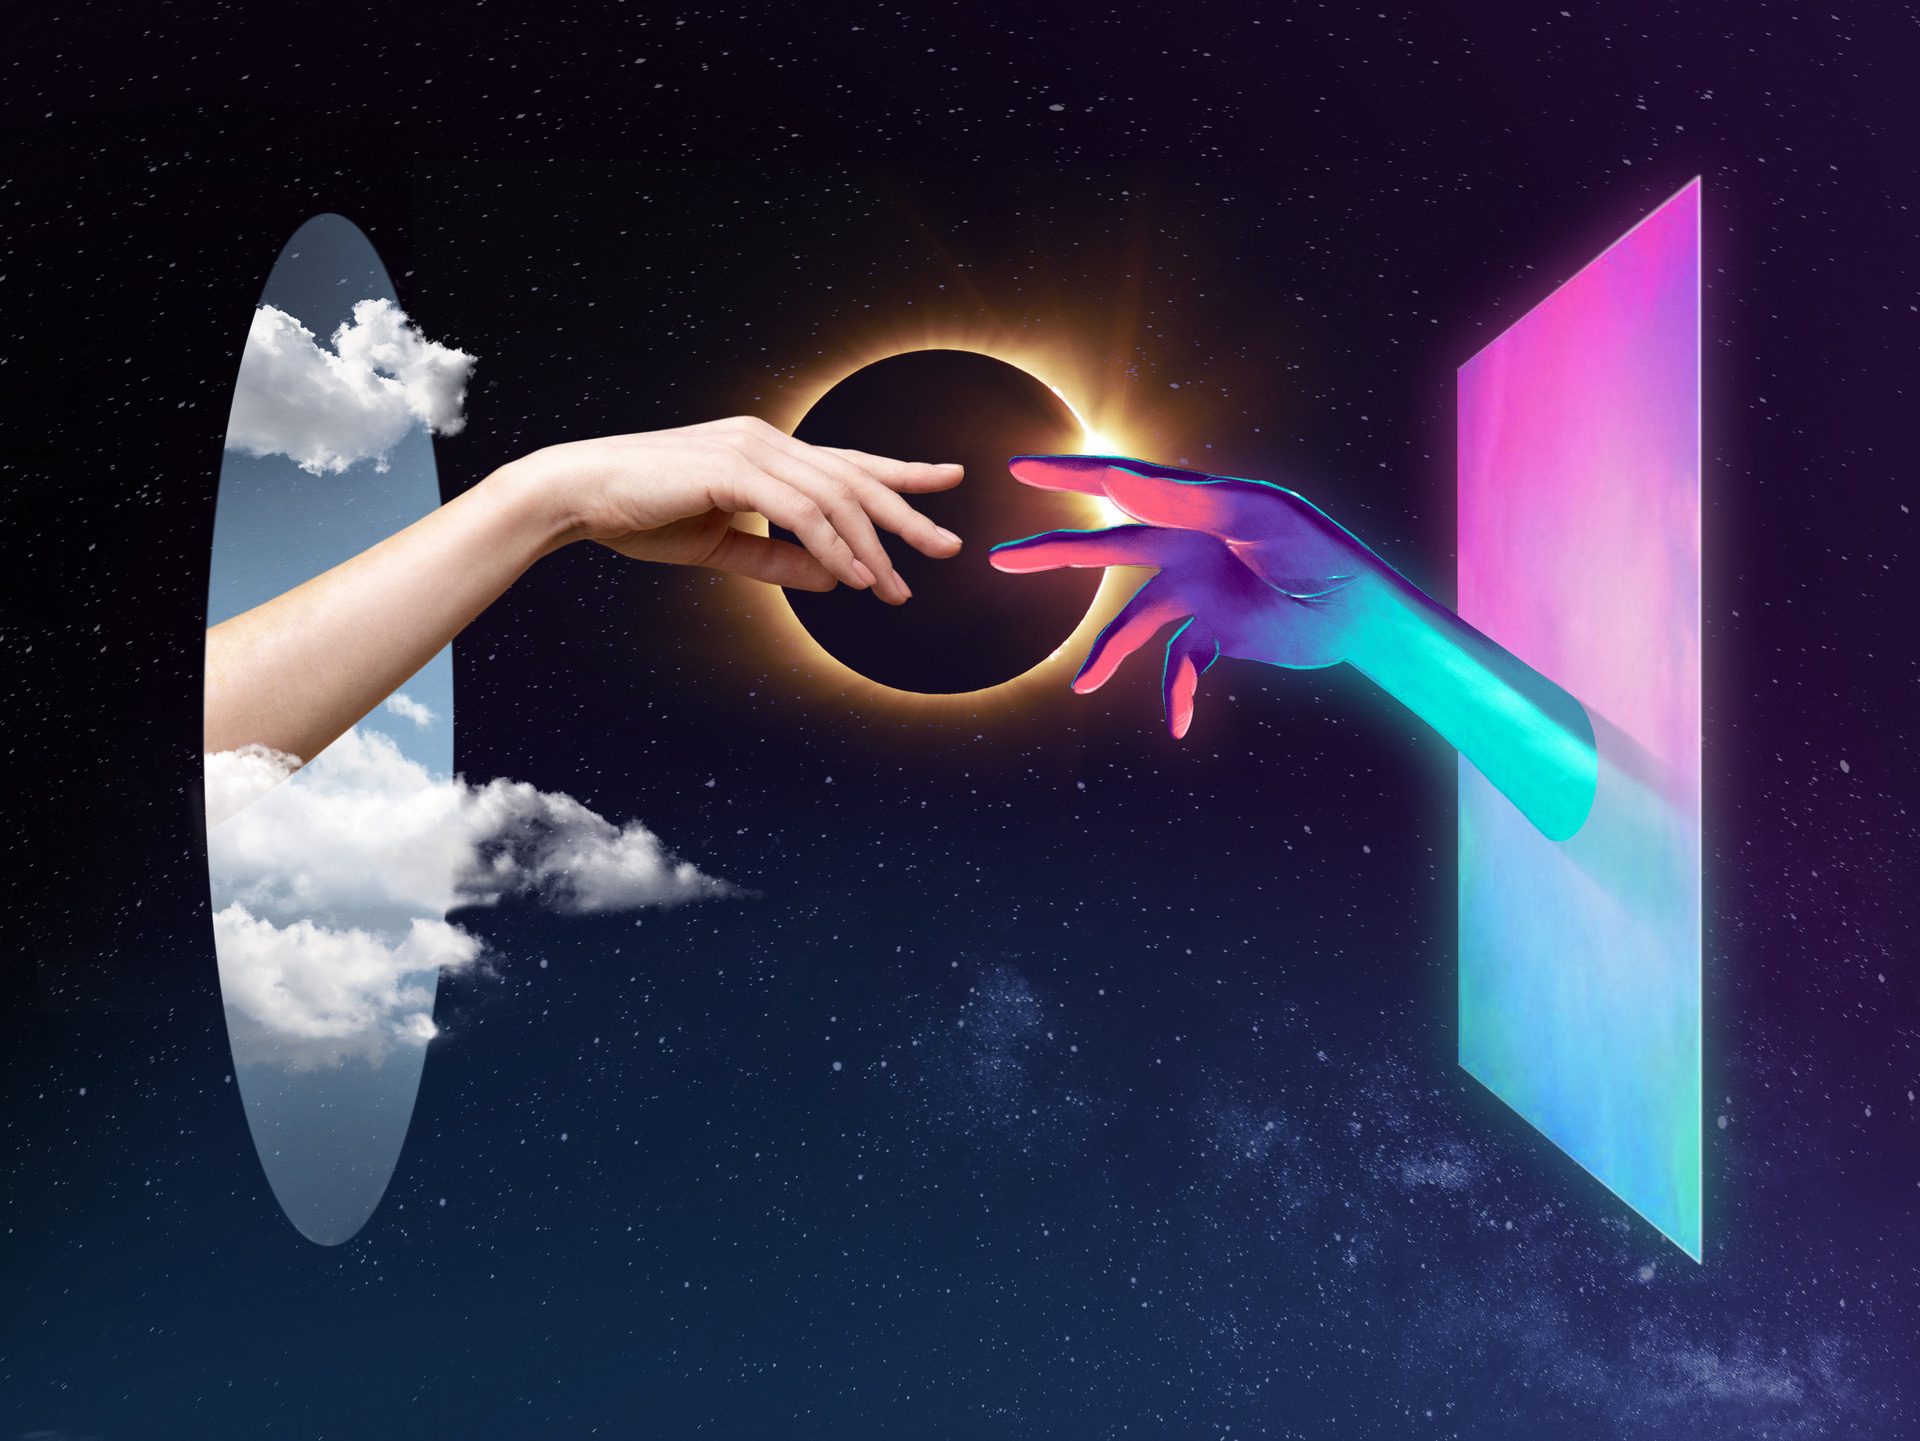 two-3d-hands-reaching-each-other-metaverse-1920x1441